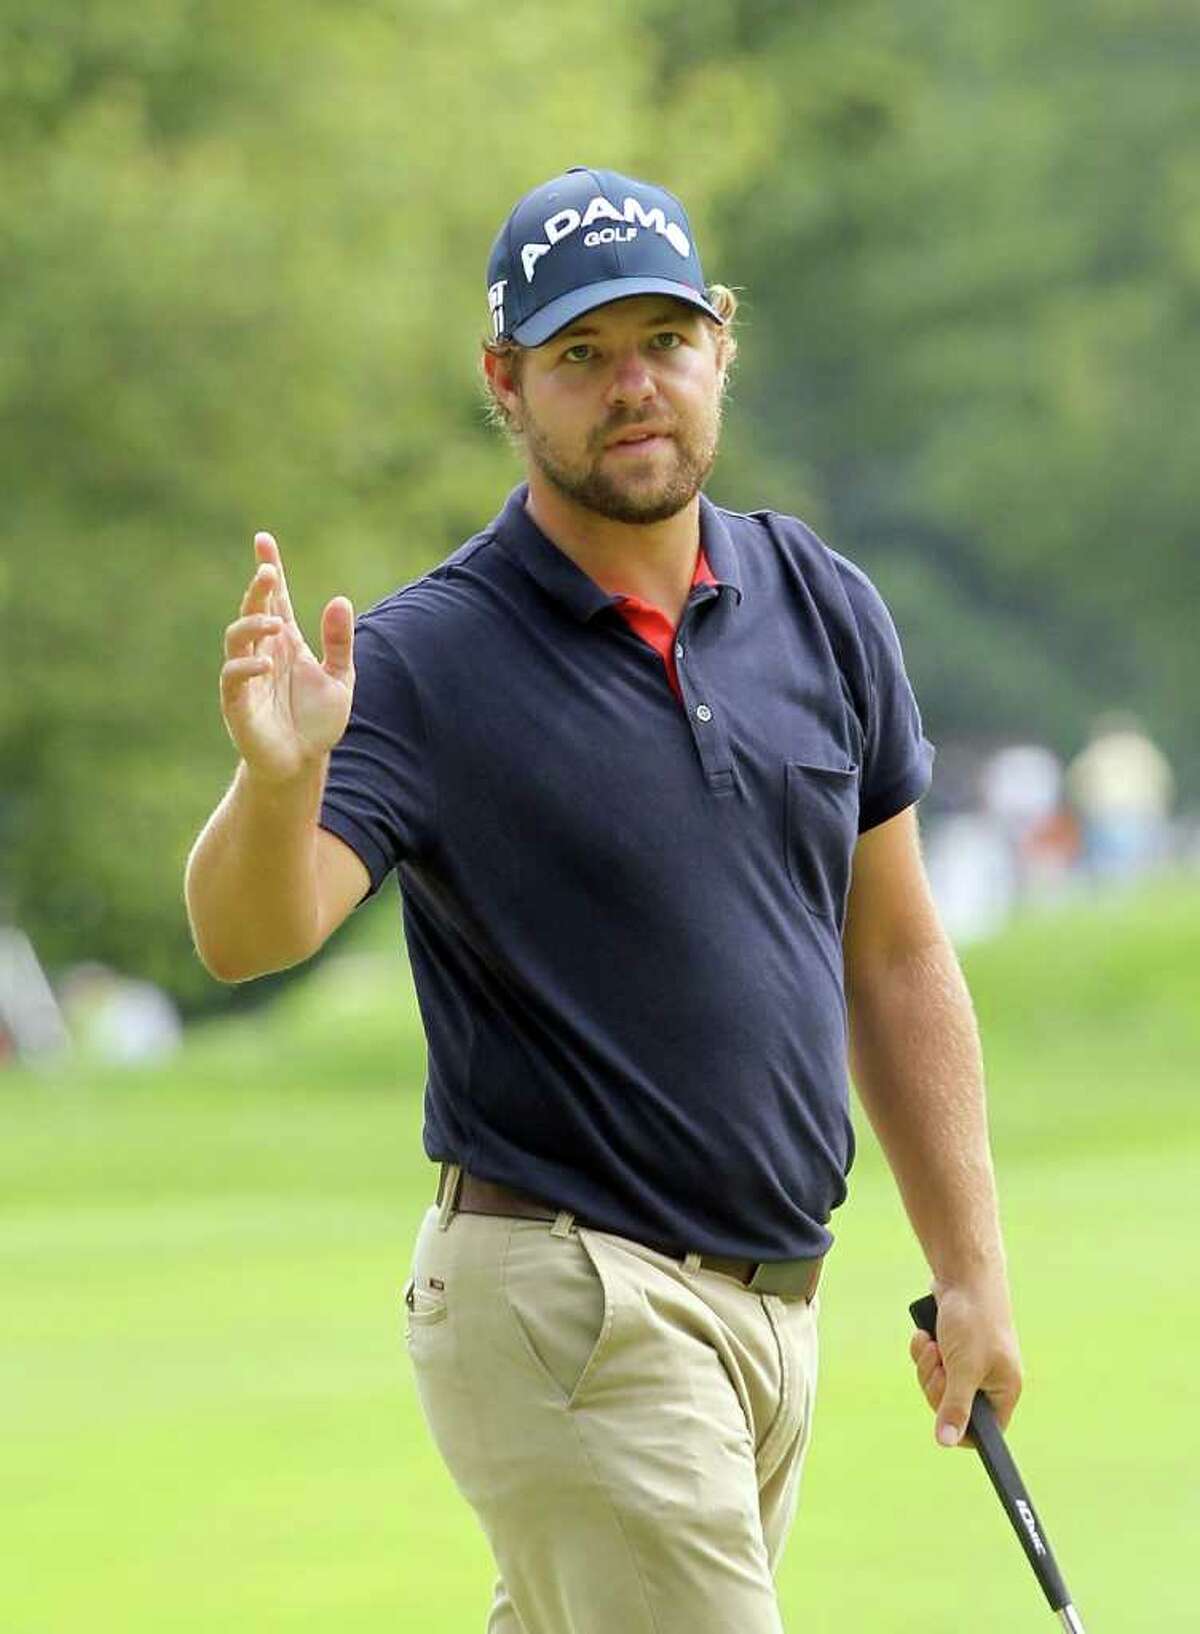 CROMWELL, CT - JUNE 26: Ryan Moore reacts during the final round of the Travelers Championship at TPC River Highlands on June 26, 2011 in Cromwell, Connecticut. (Photo by Jim Rogash/Getty Images)